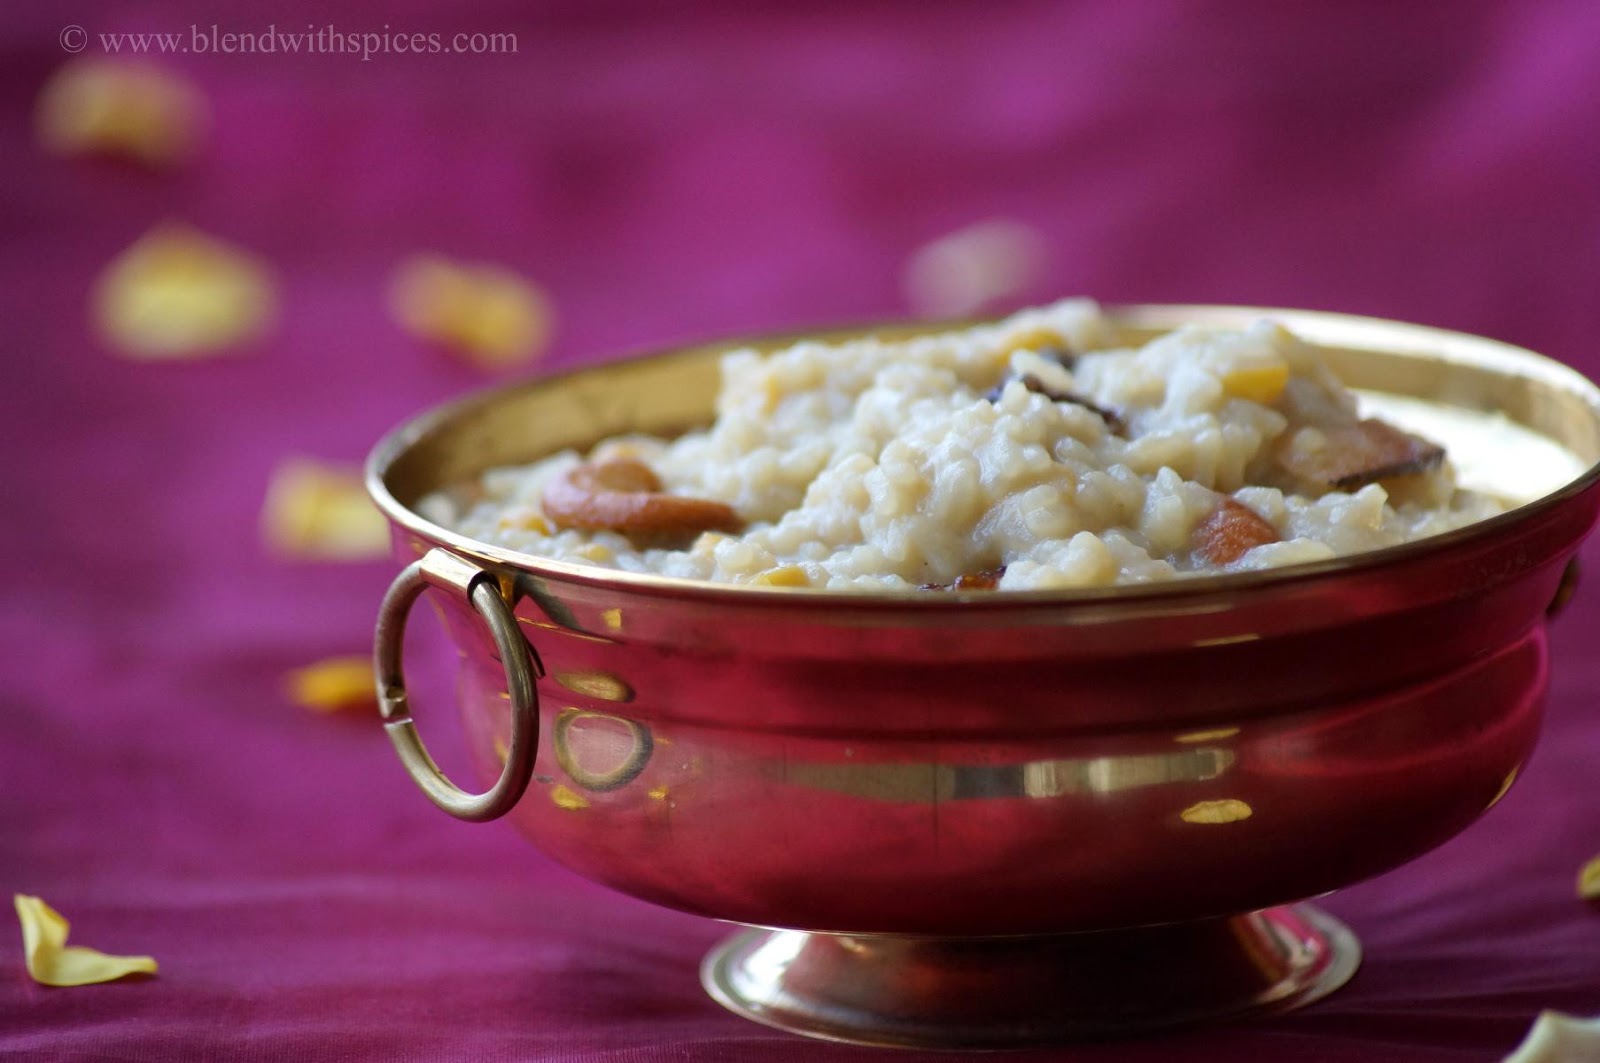 recipe of jaggery pongal, how to make jaggery pongal, sweet jaggery pongal